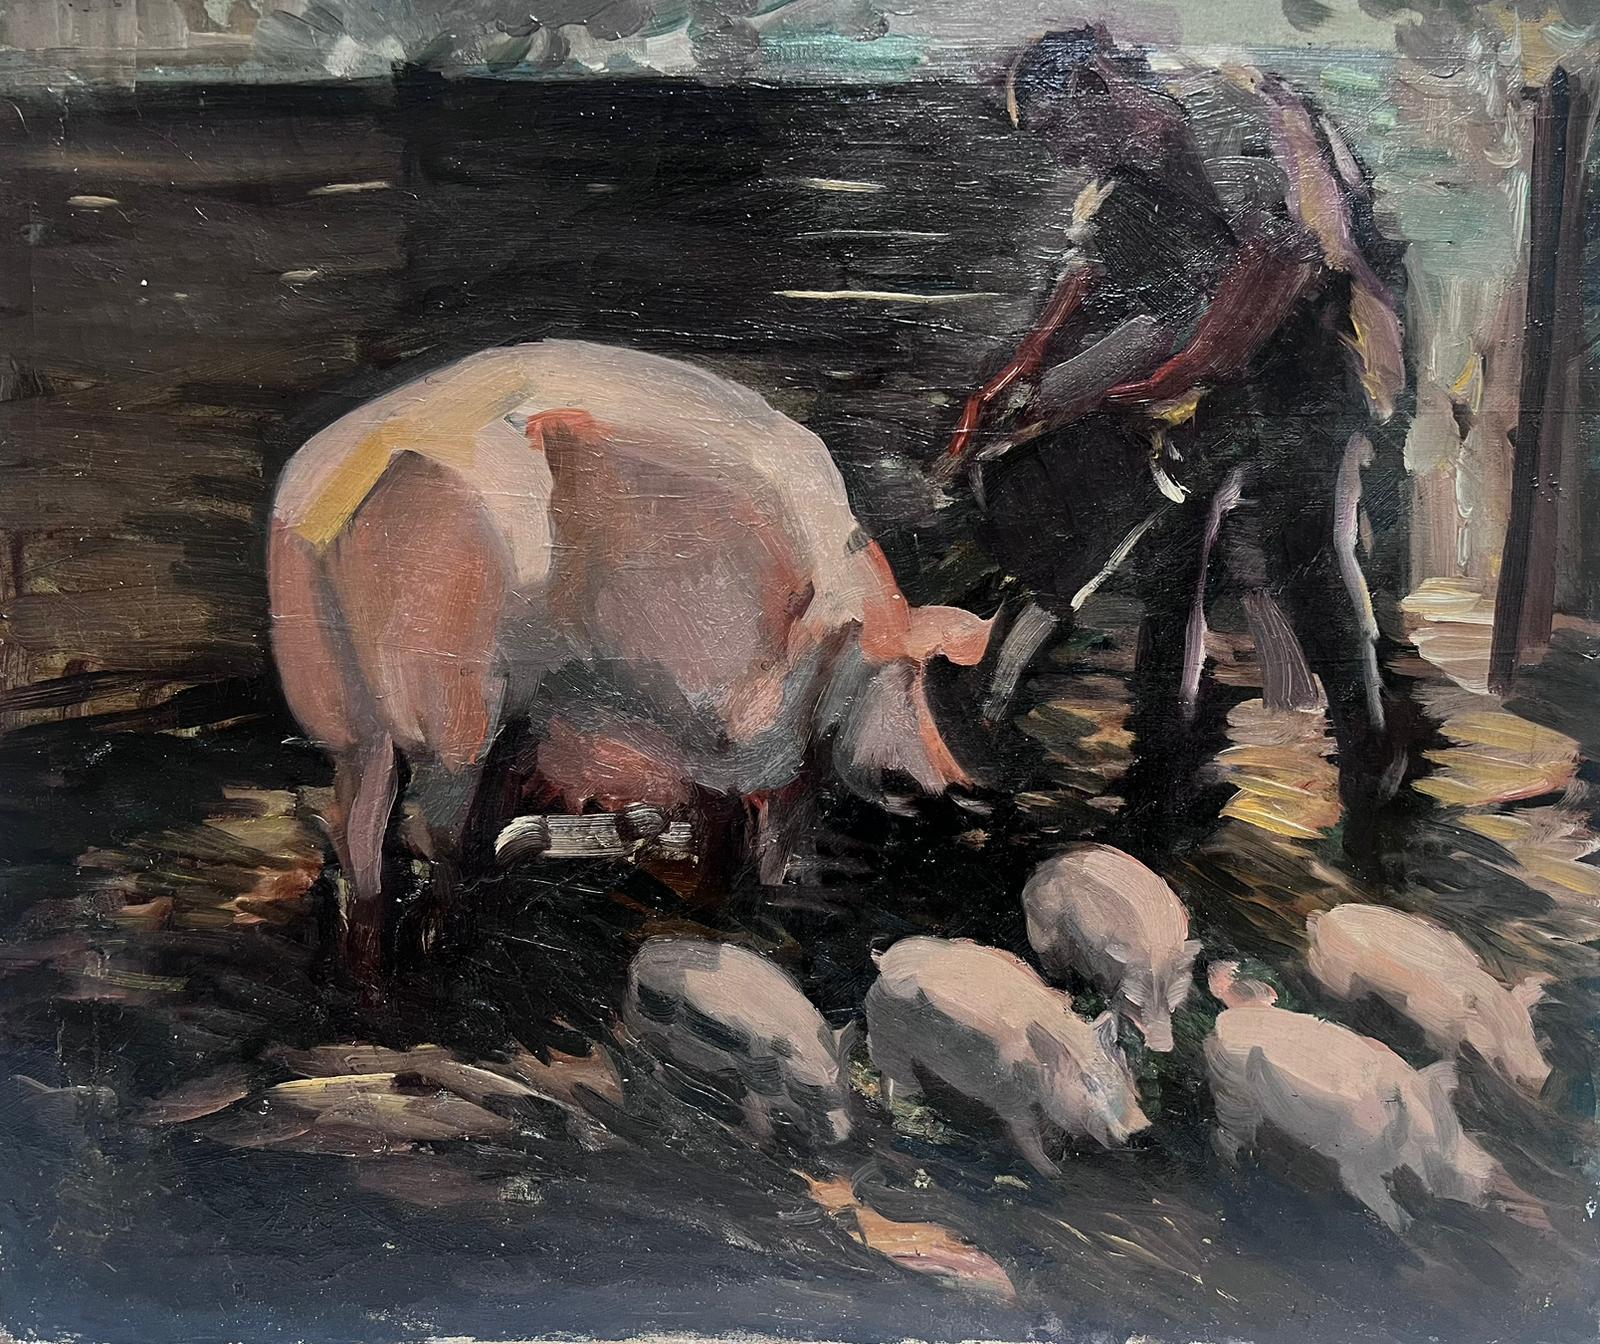 Sunderland Rollinson Figurative Painting - 1930's English Impressionist Oil Painting Farmer Feeding Pigs in Sty large work